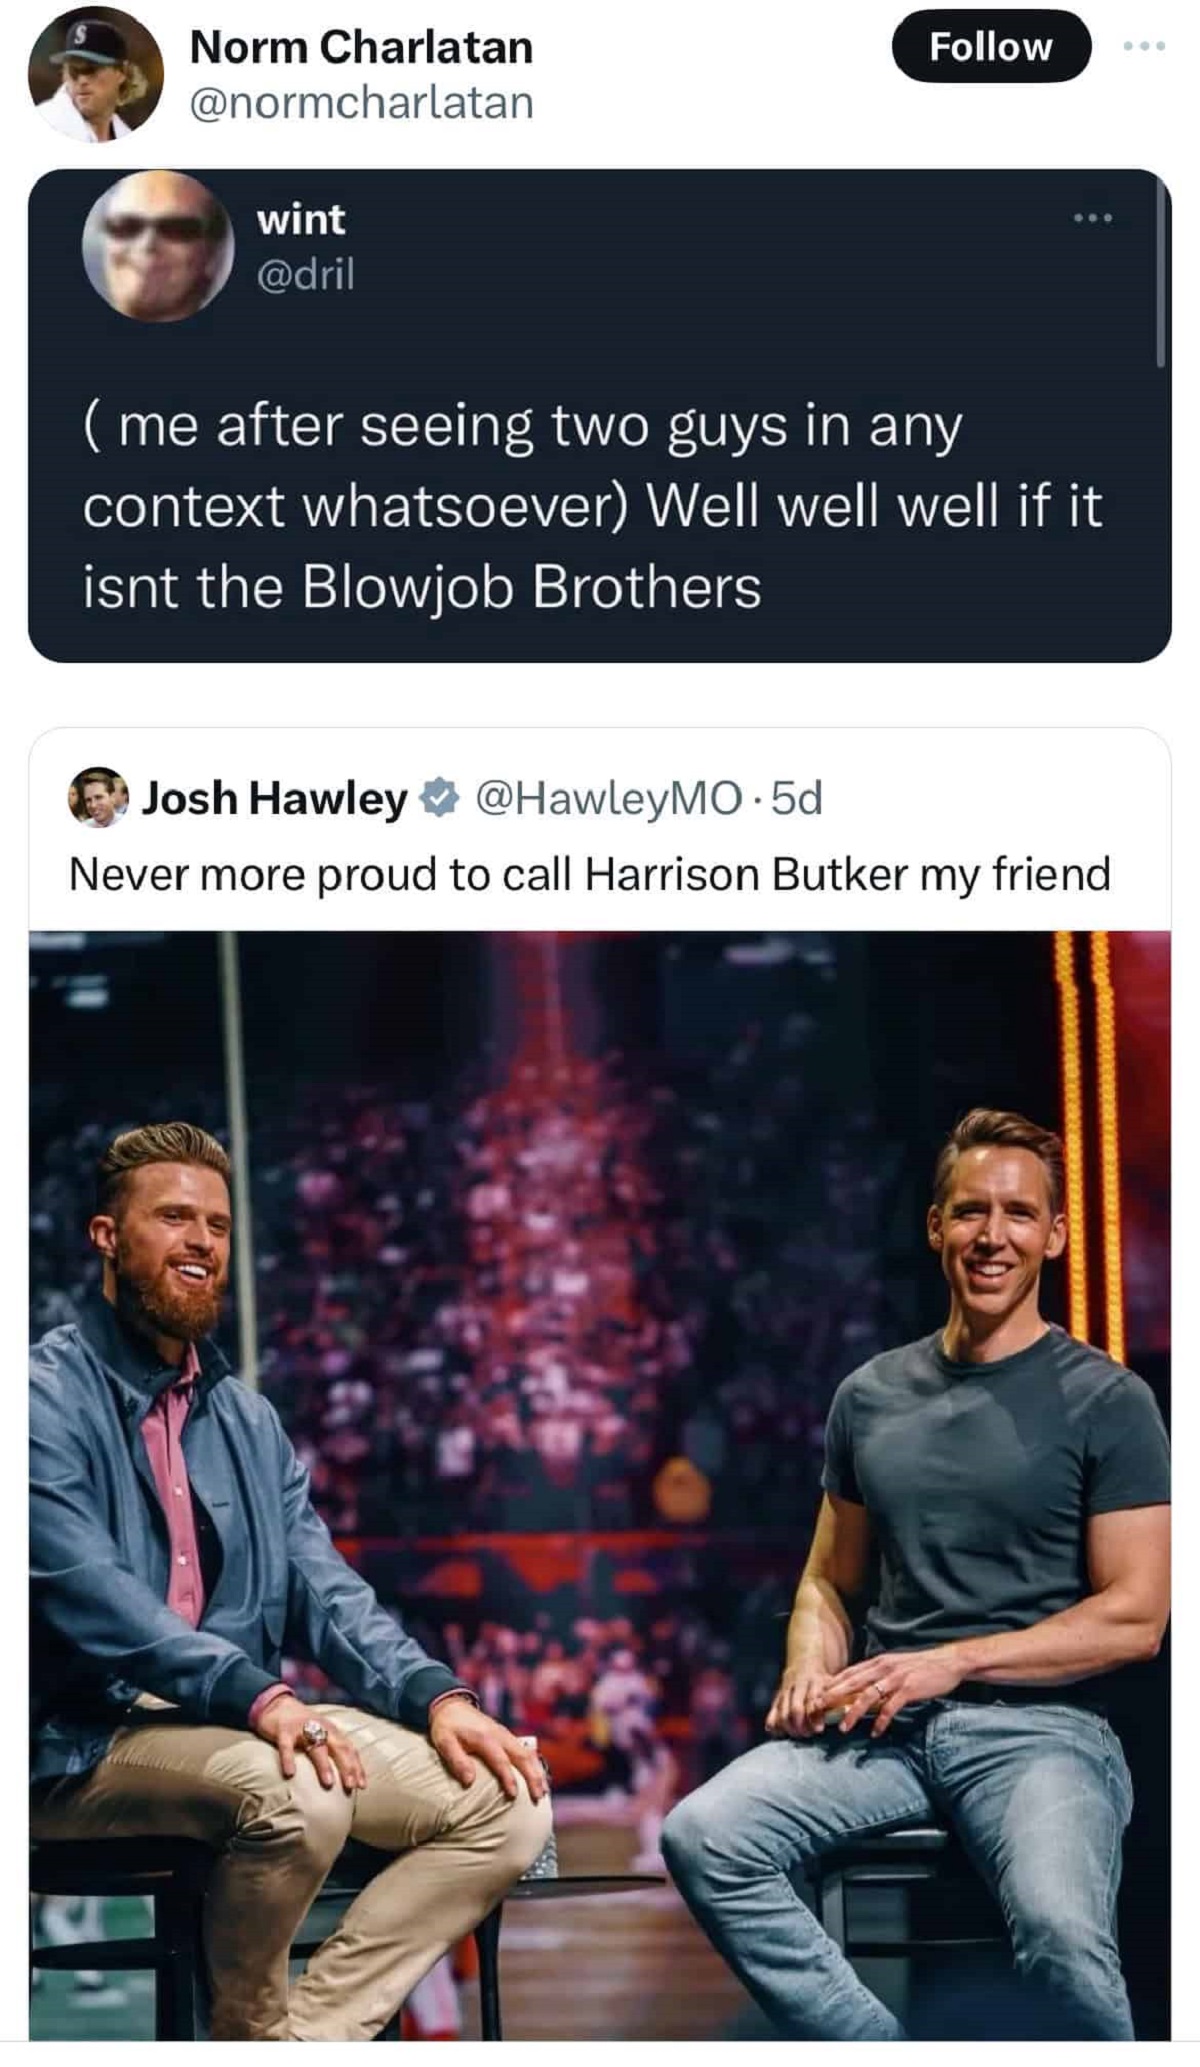 josh hawley harrison butker - Norm Charlatan wint me after seeing two guys in any context whatsoever Well well well if it isnt the Blowjob Brothers Josh Hawley HawleyMO.5d Never more proud to call Harrison Butker my friend